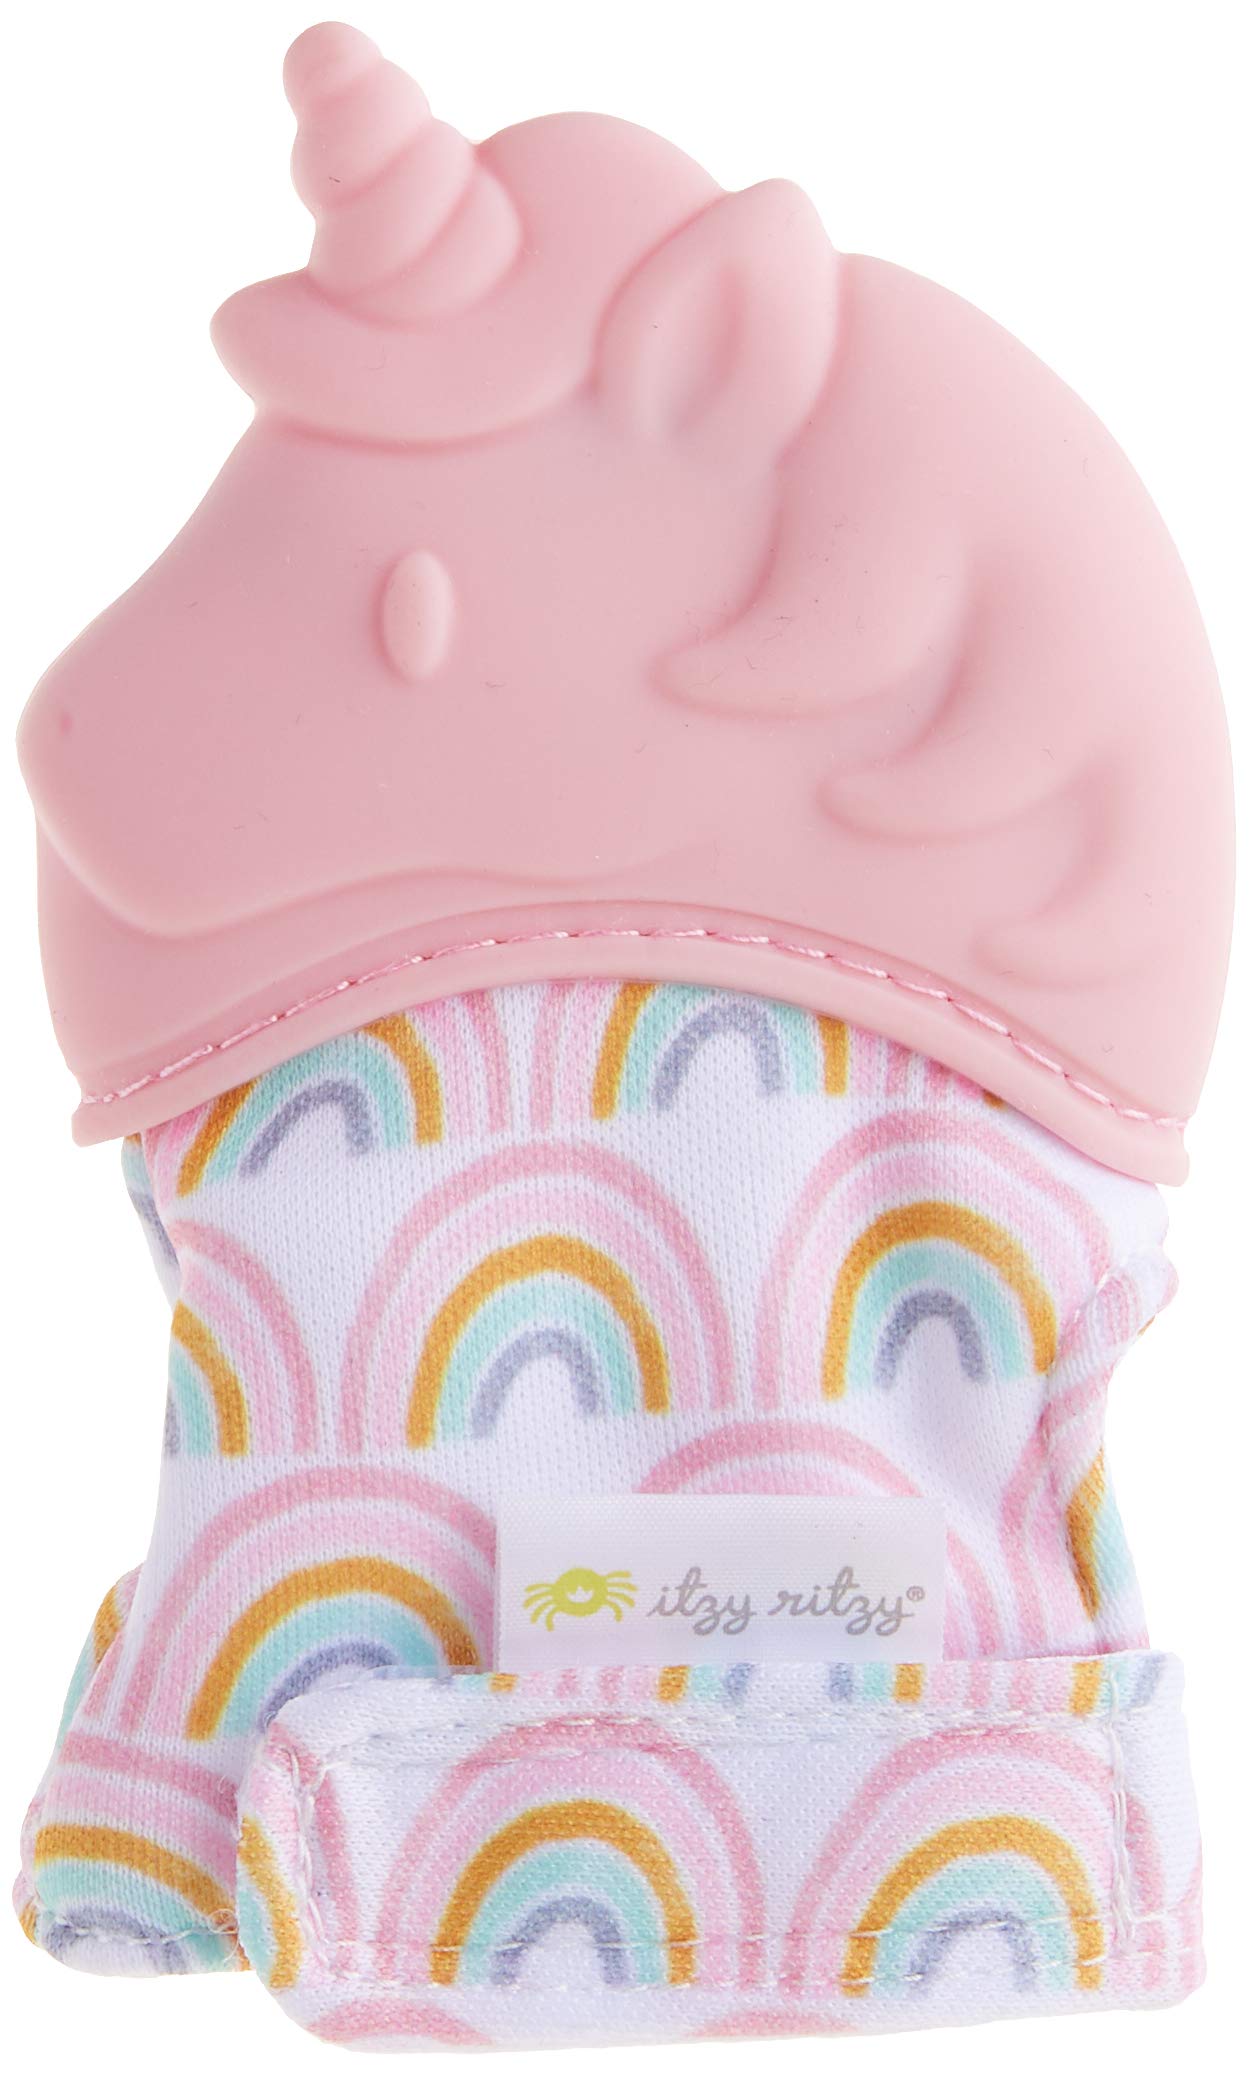 Itzy Ritzy Silicone Teething Mitt - Soothing Infant Teething Mitten with Adjustable Strap, Crinkle Sound & Textured Silicone to Soothe Sore & Swollen Gums, Blush Unicorn